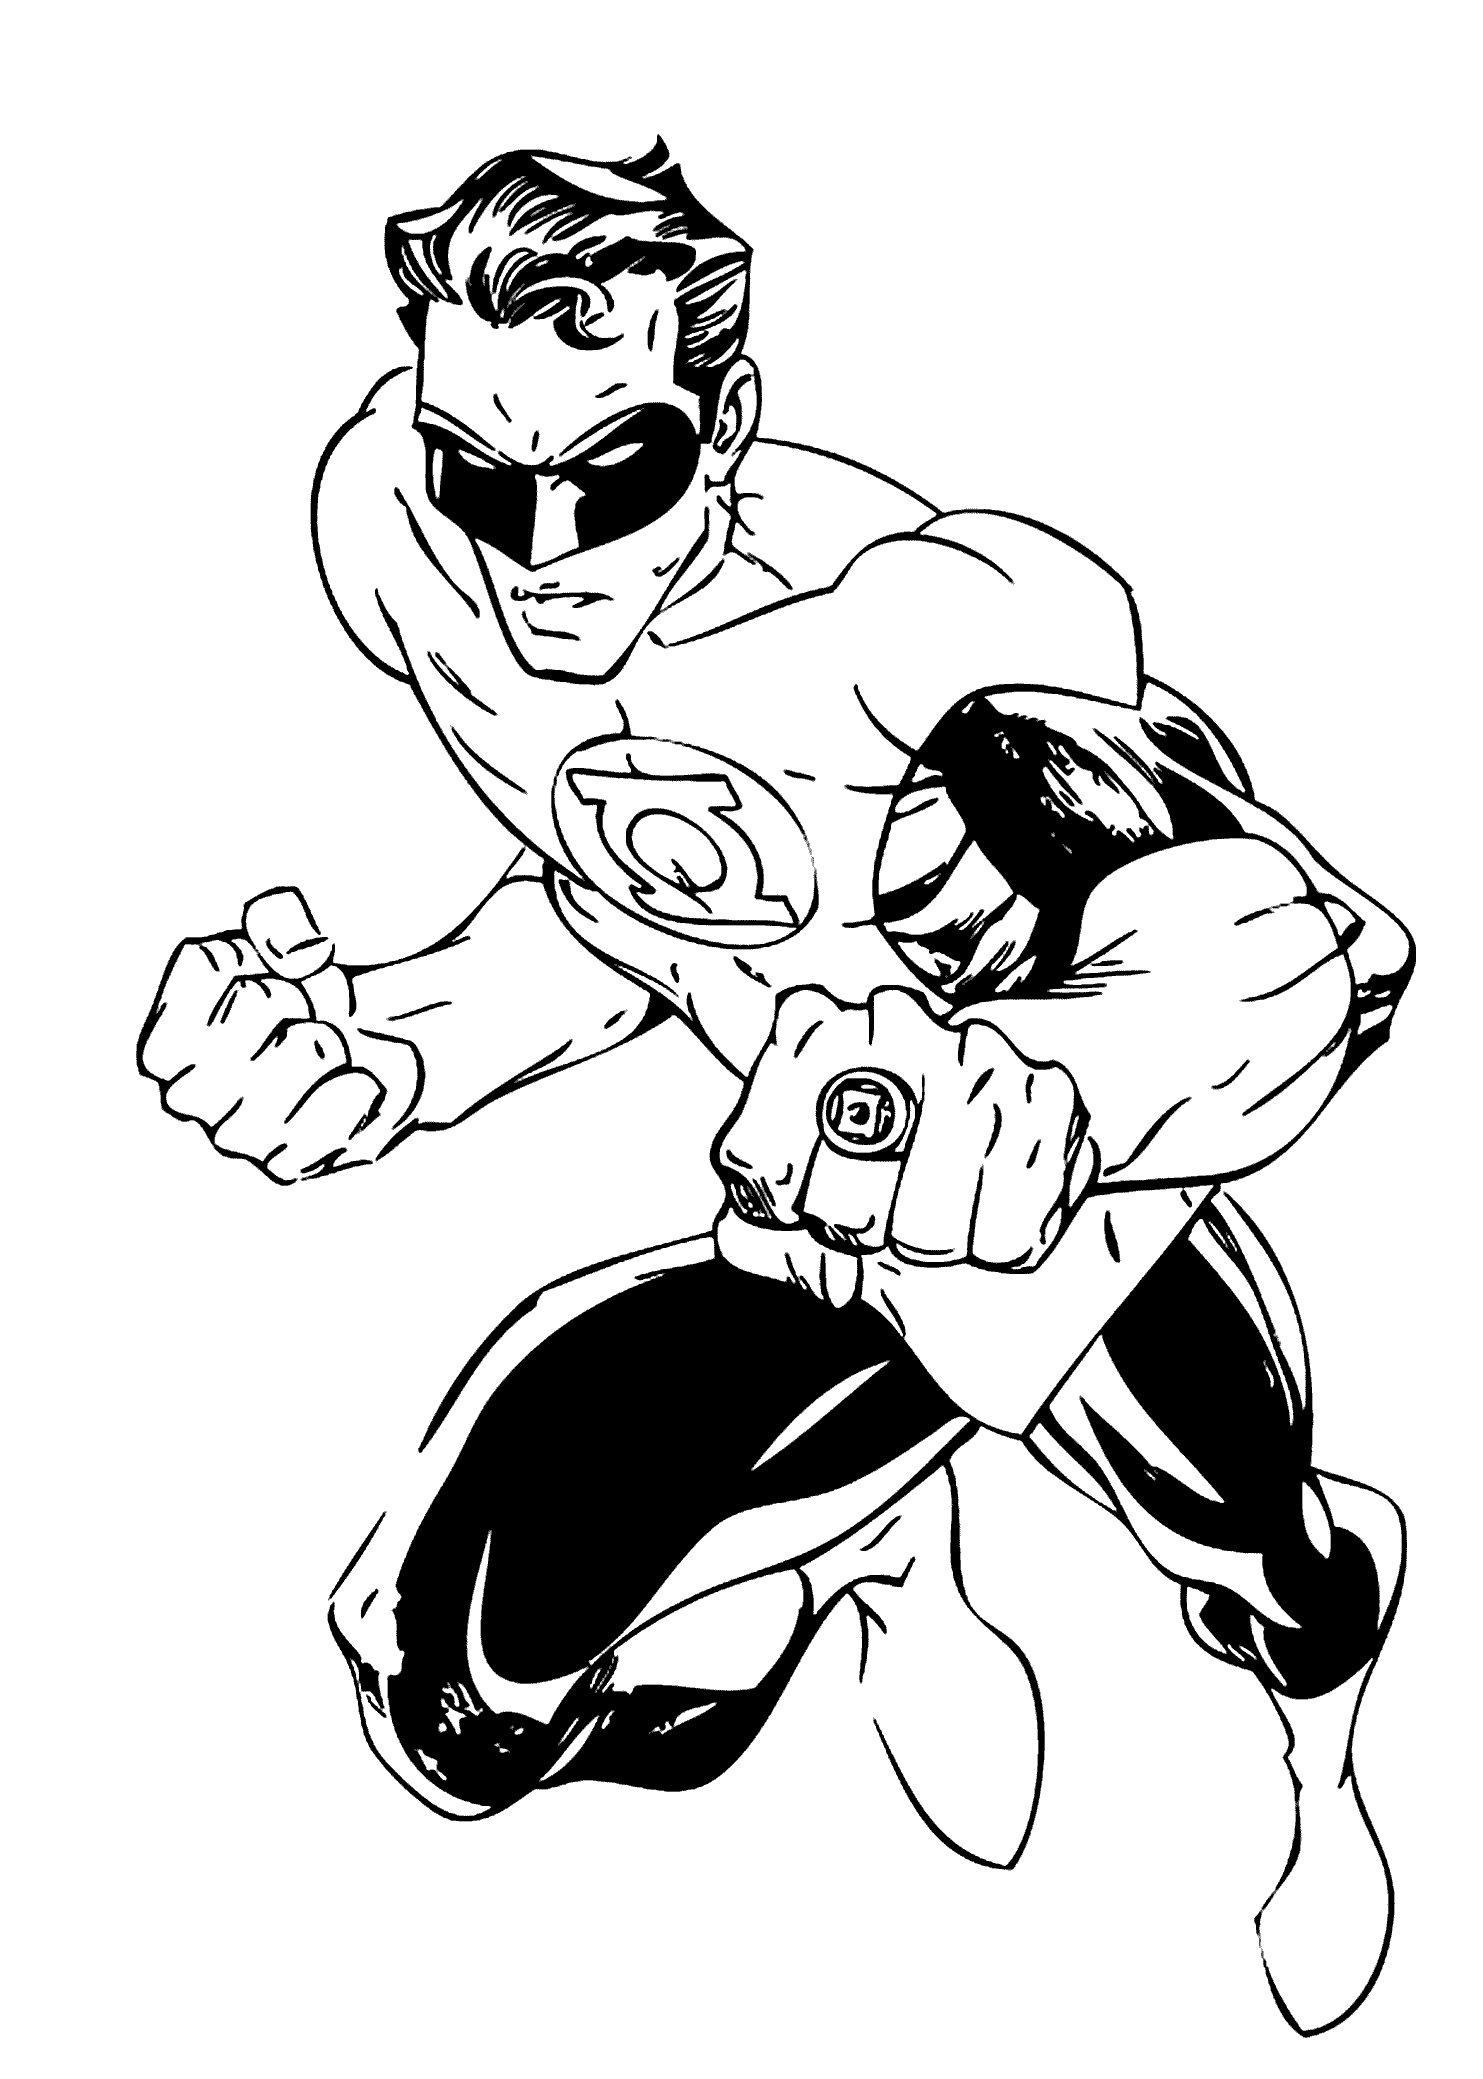 Green lantern coloring pages to download and print for free